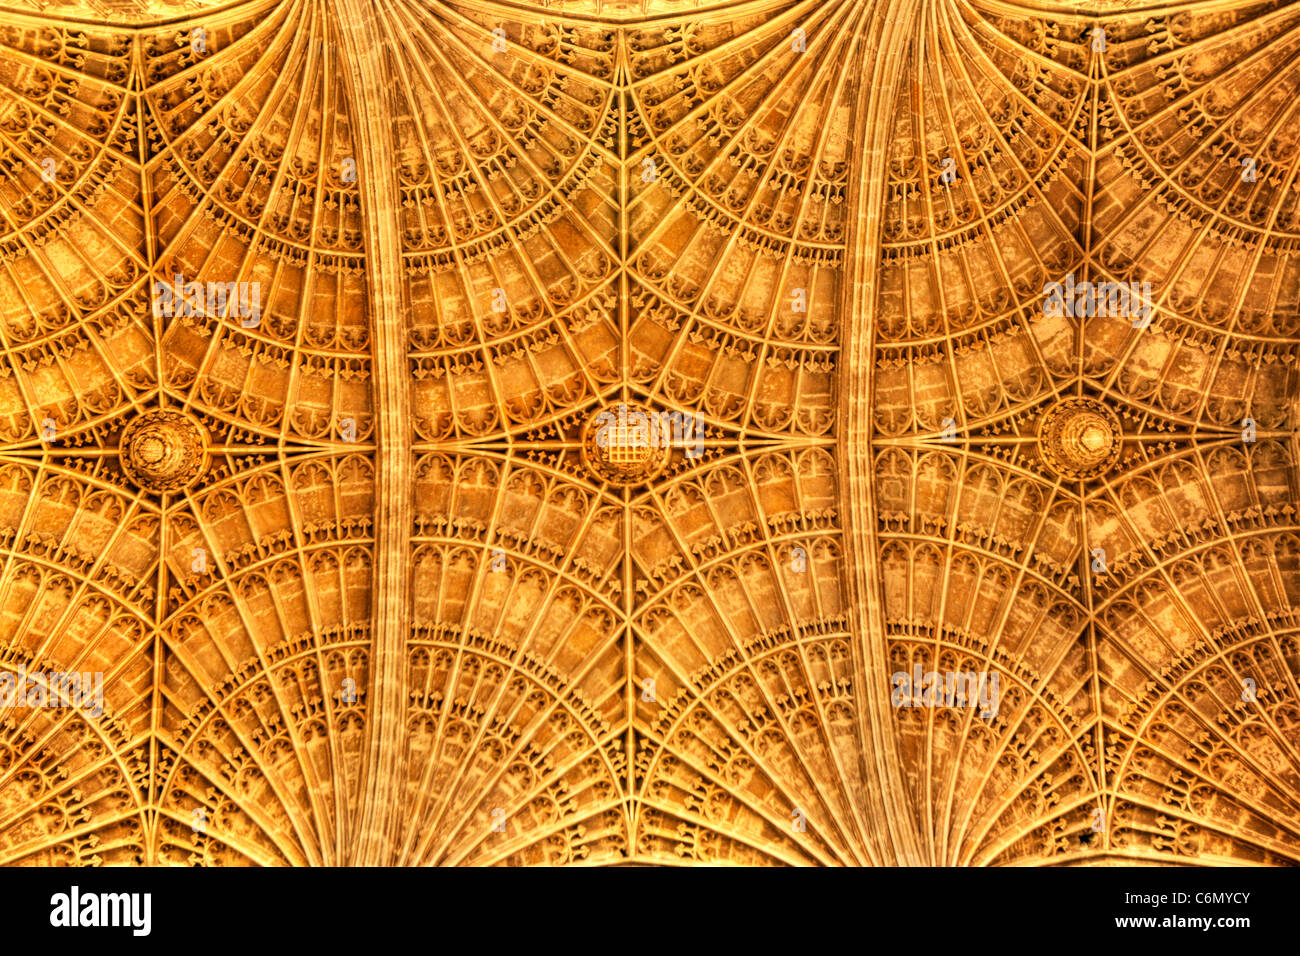 Close up view from below of the fan vaulted ceiling at Kings college, Cambridge University Stock Photo